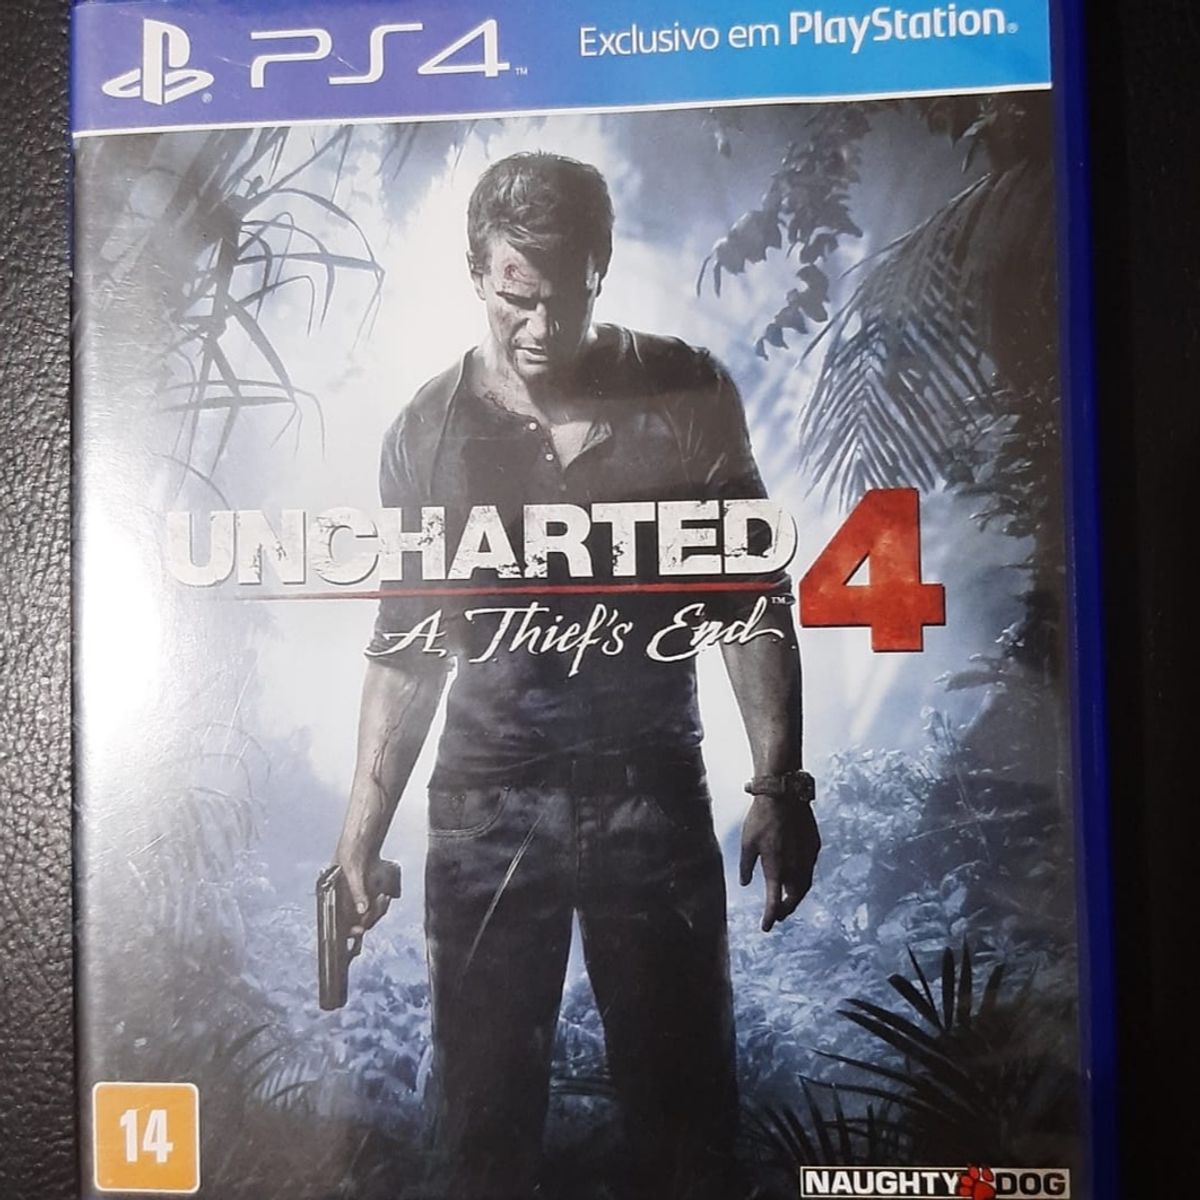 Seminovo - Uncharted 4 A Thief's End - PS4